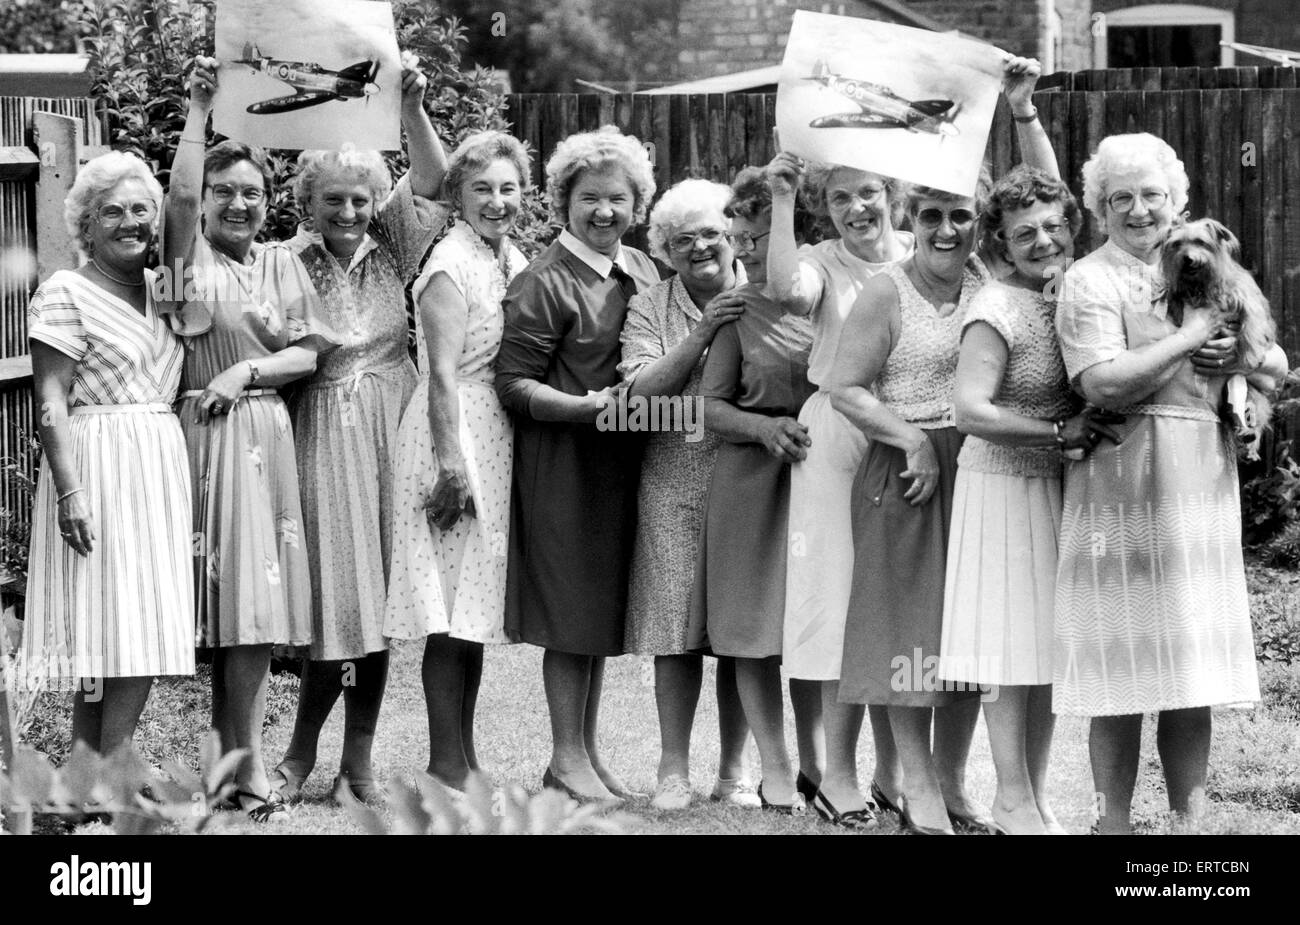 reunion for Spitfire workers who assembled the wings of the iconic British fighter planes in Newhall Street, central Birmingham during 1941 and 1942. hey were all single girls at the factory where they worked seven days a week for £4 including bonuses.  J Stock Photo